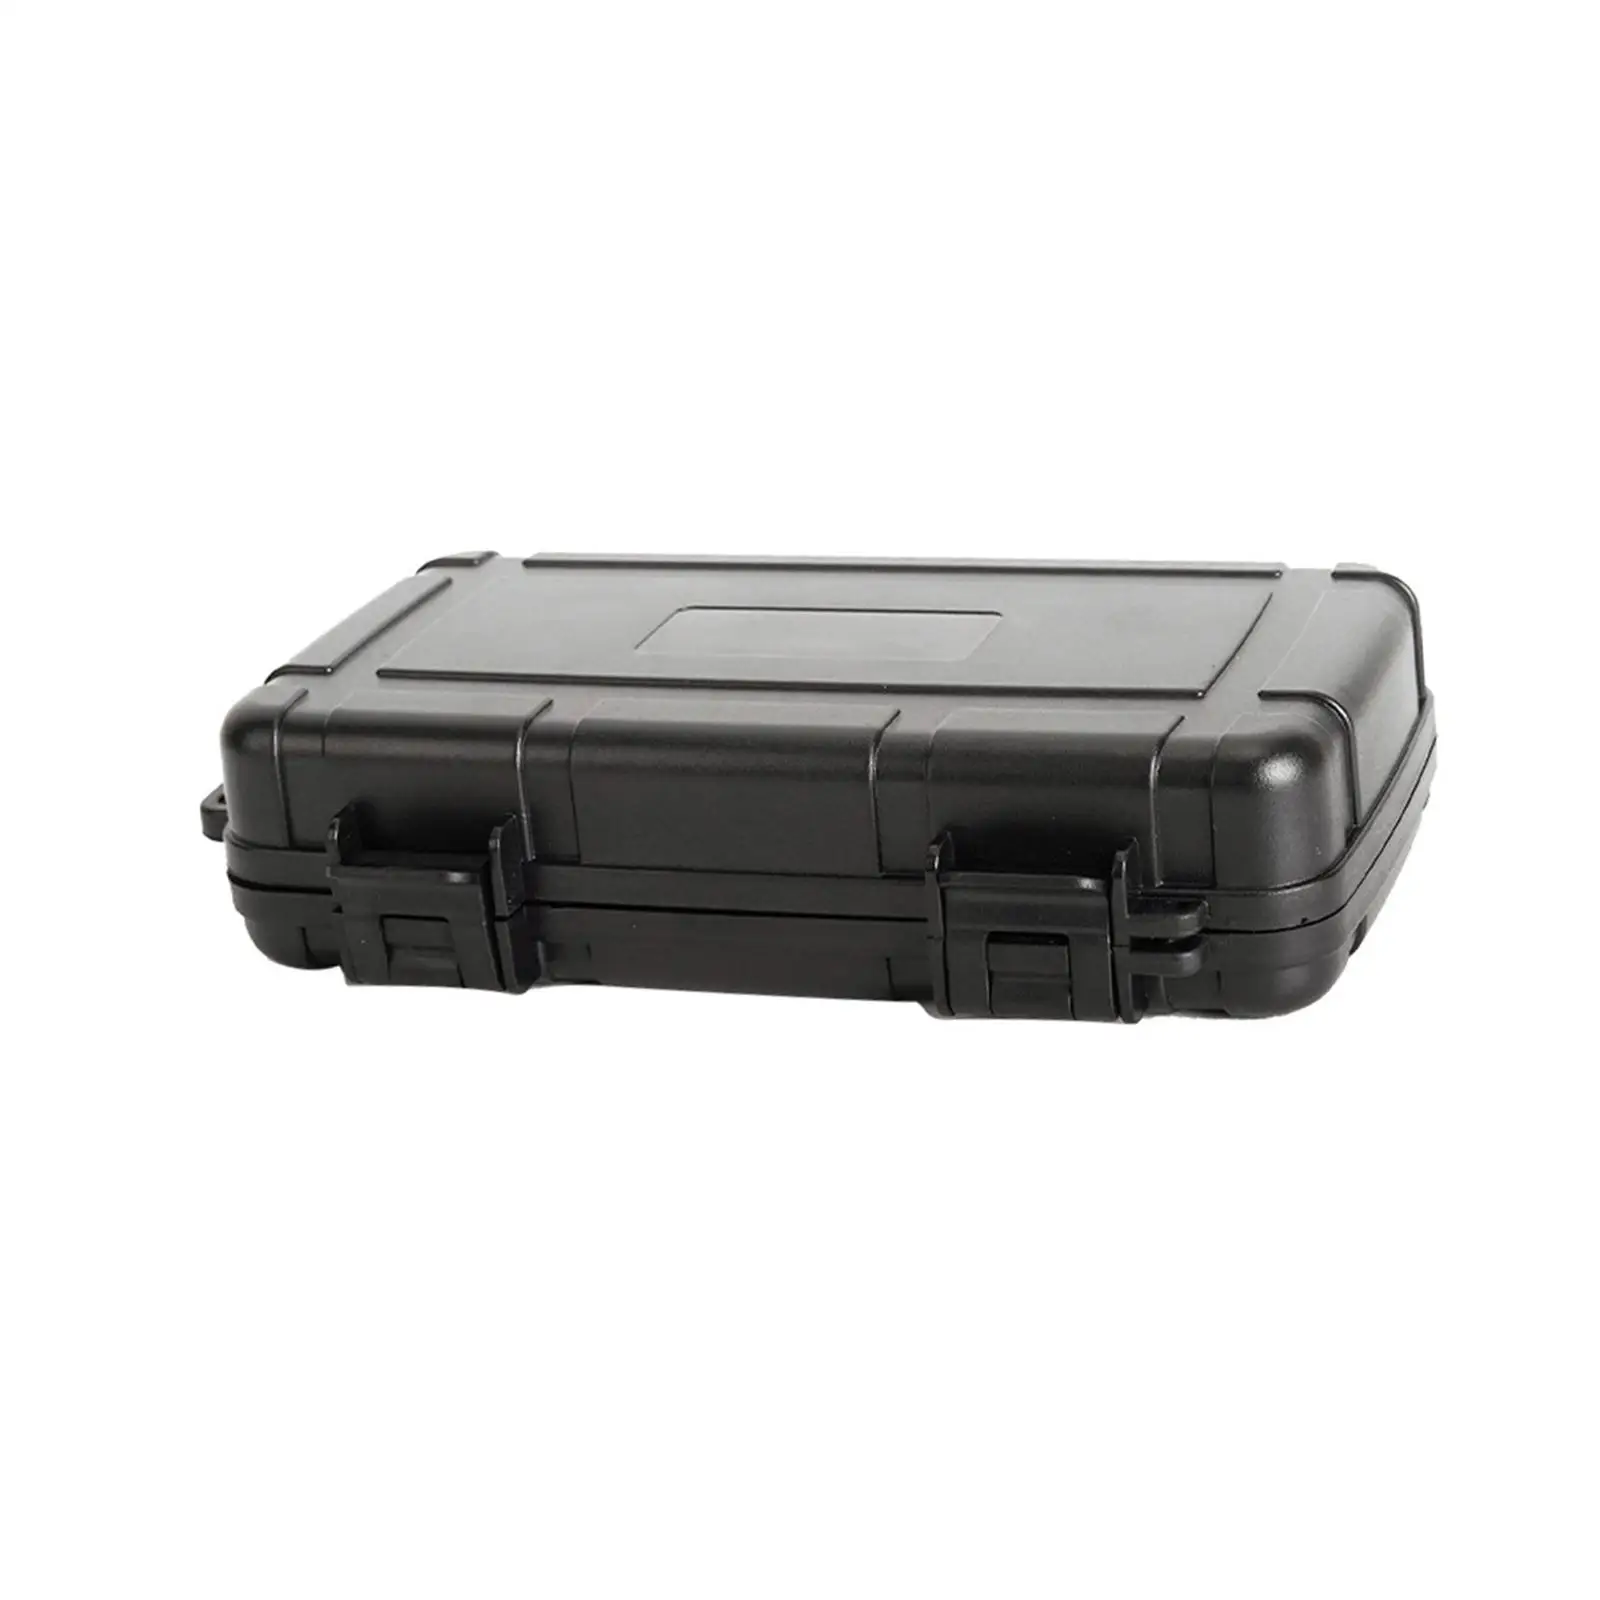 Tool Case Storage Box with Sponge Carrying Anti Impact Shockproof Hardware Organizer for Warehouse Instrument Camera Gear